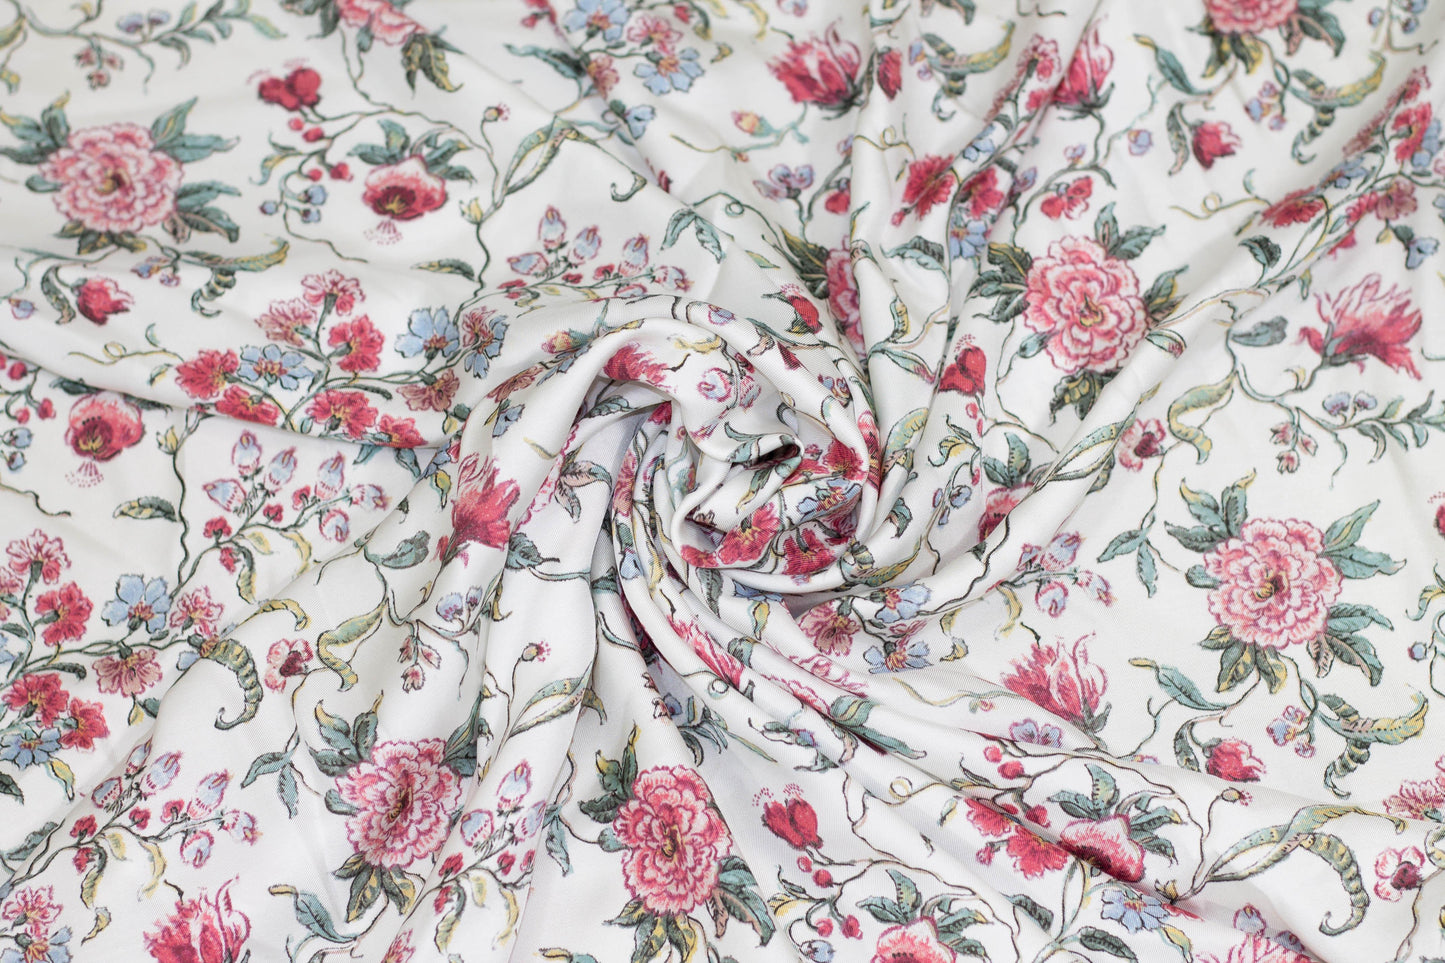 Floral Silk Charmeuse - Red, Green, Blue, White - Prime Fabrics